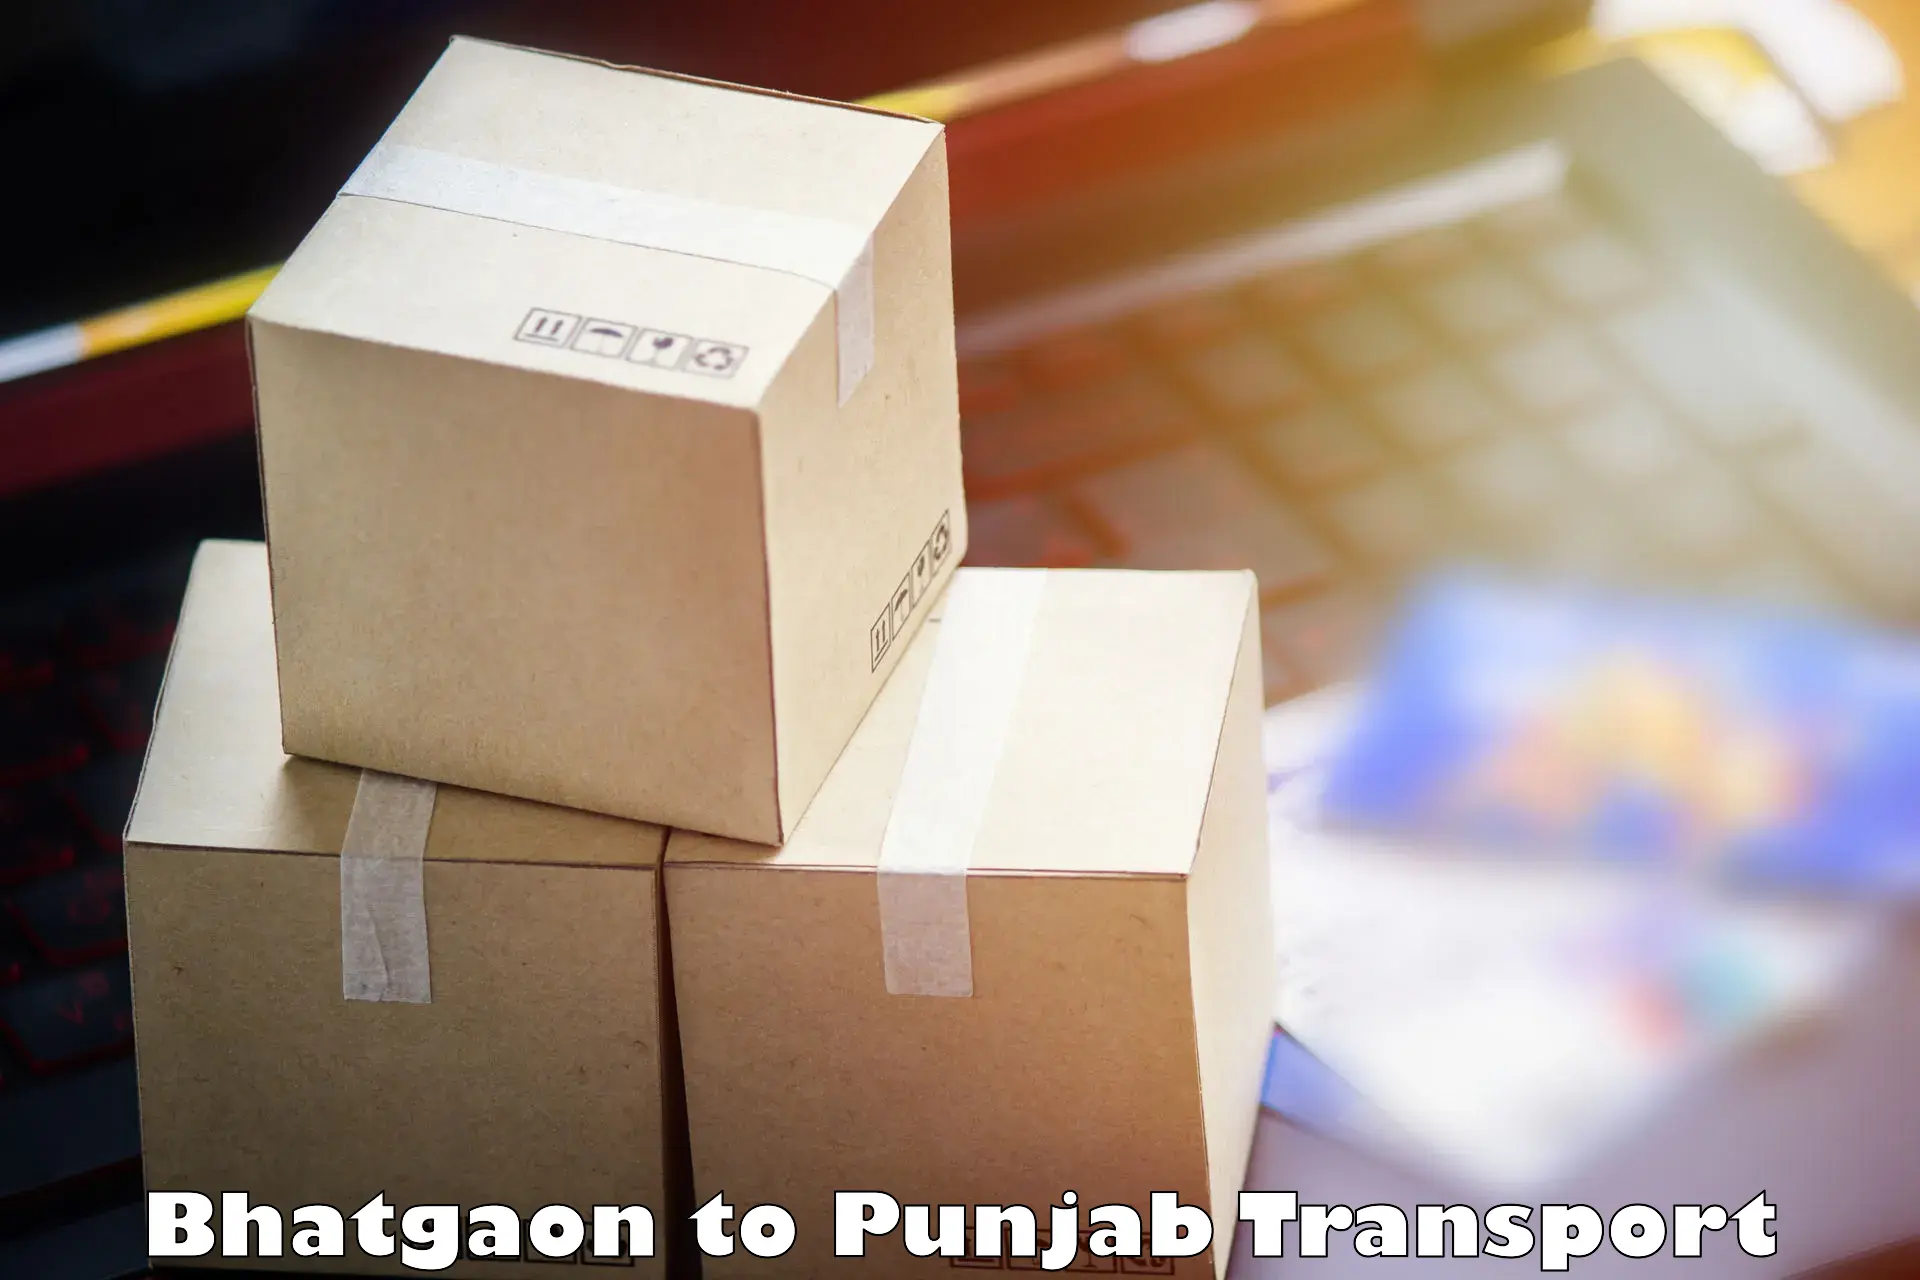 Commercial transport service Bhatgaon to Pathankot